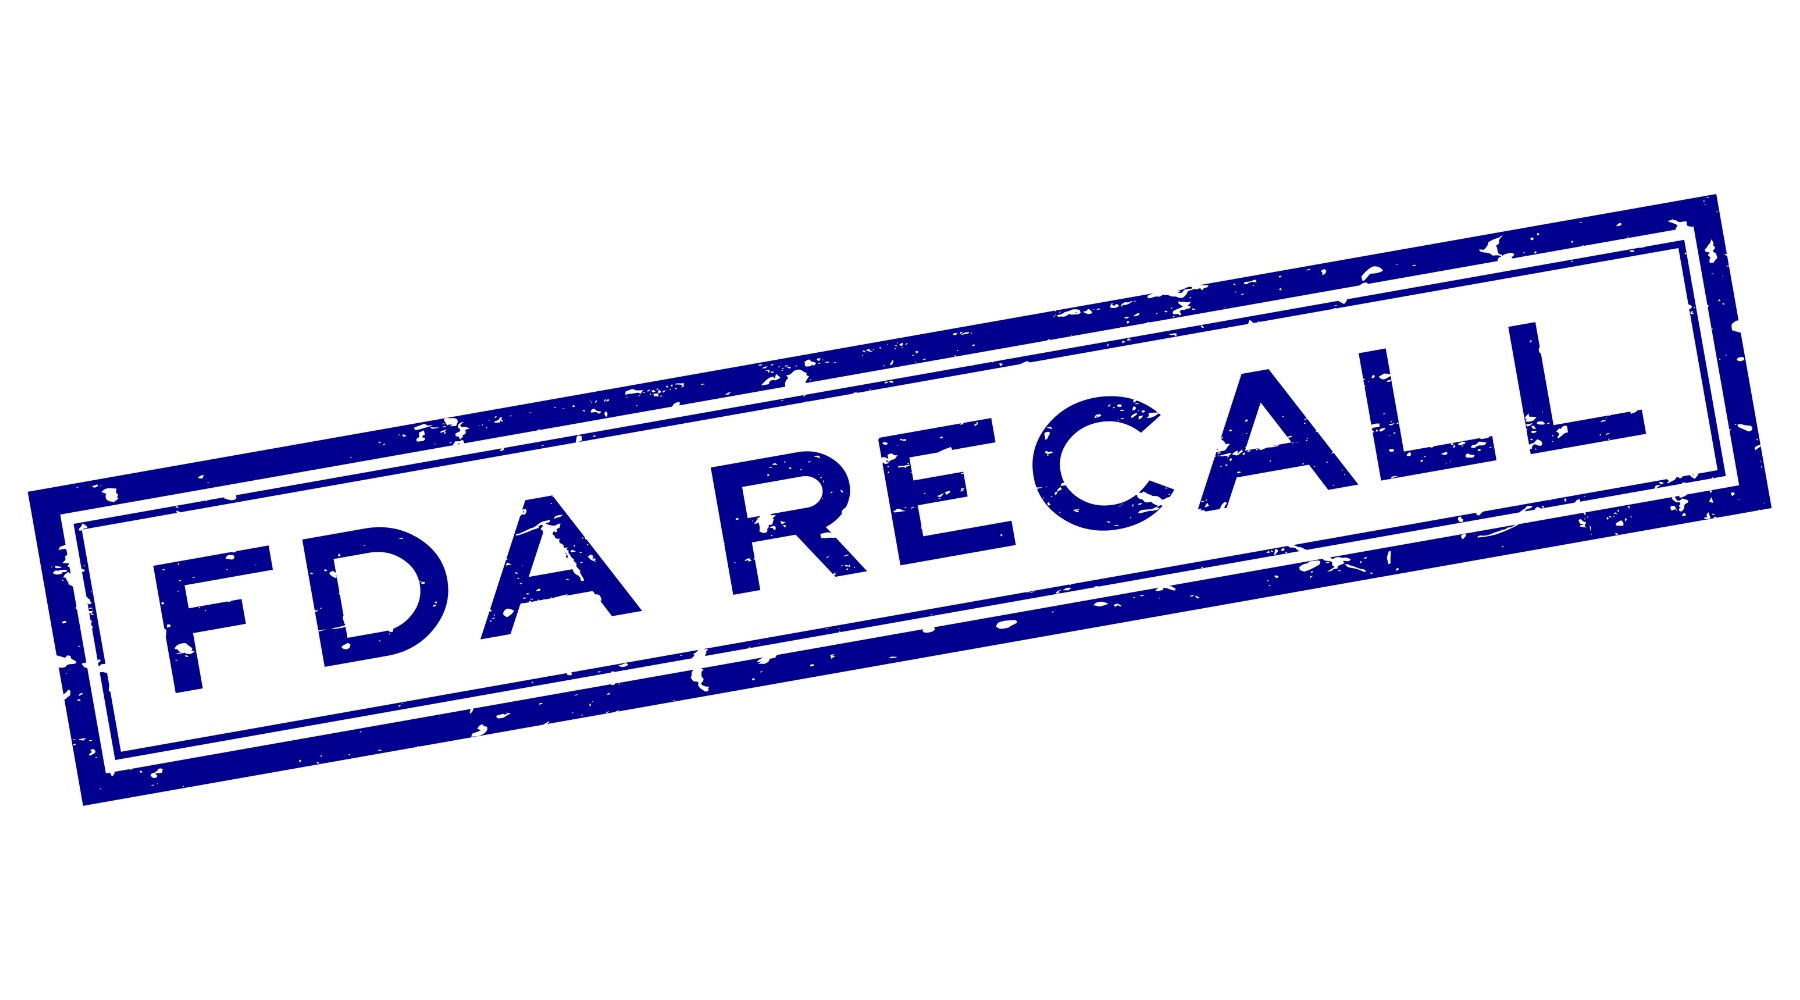 Magadyne Mega Soft Pediatric Patient Return Electrode Recalled,
Globally Discontinued